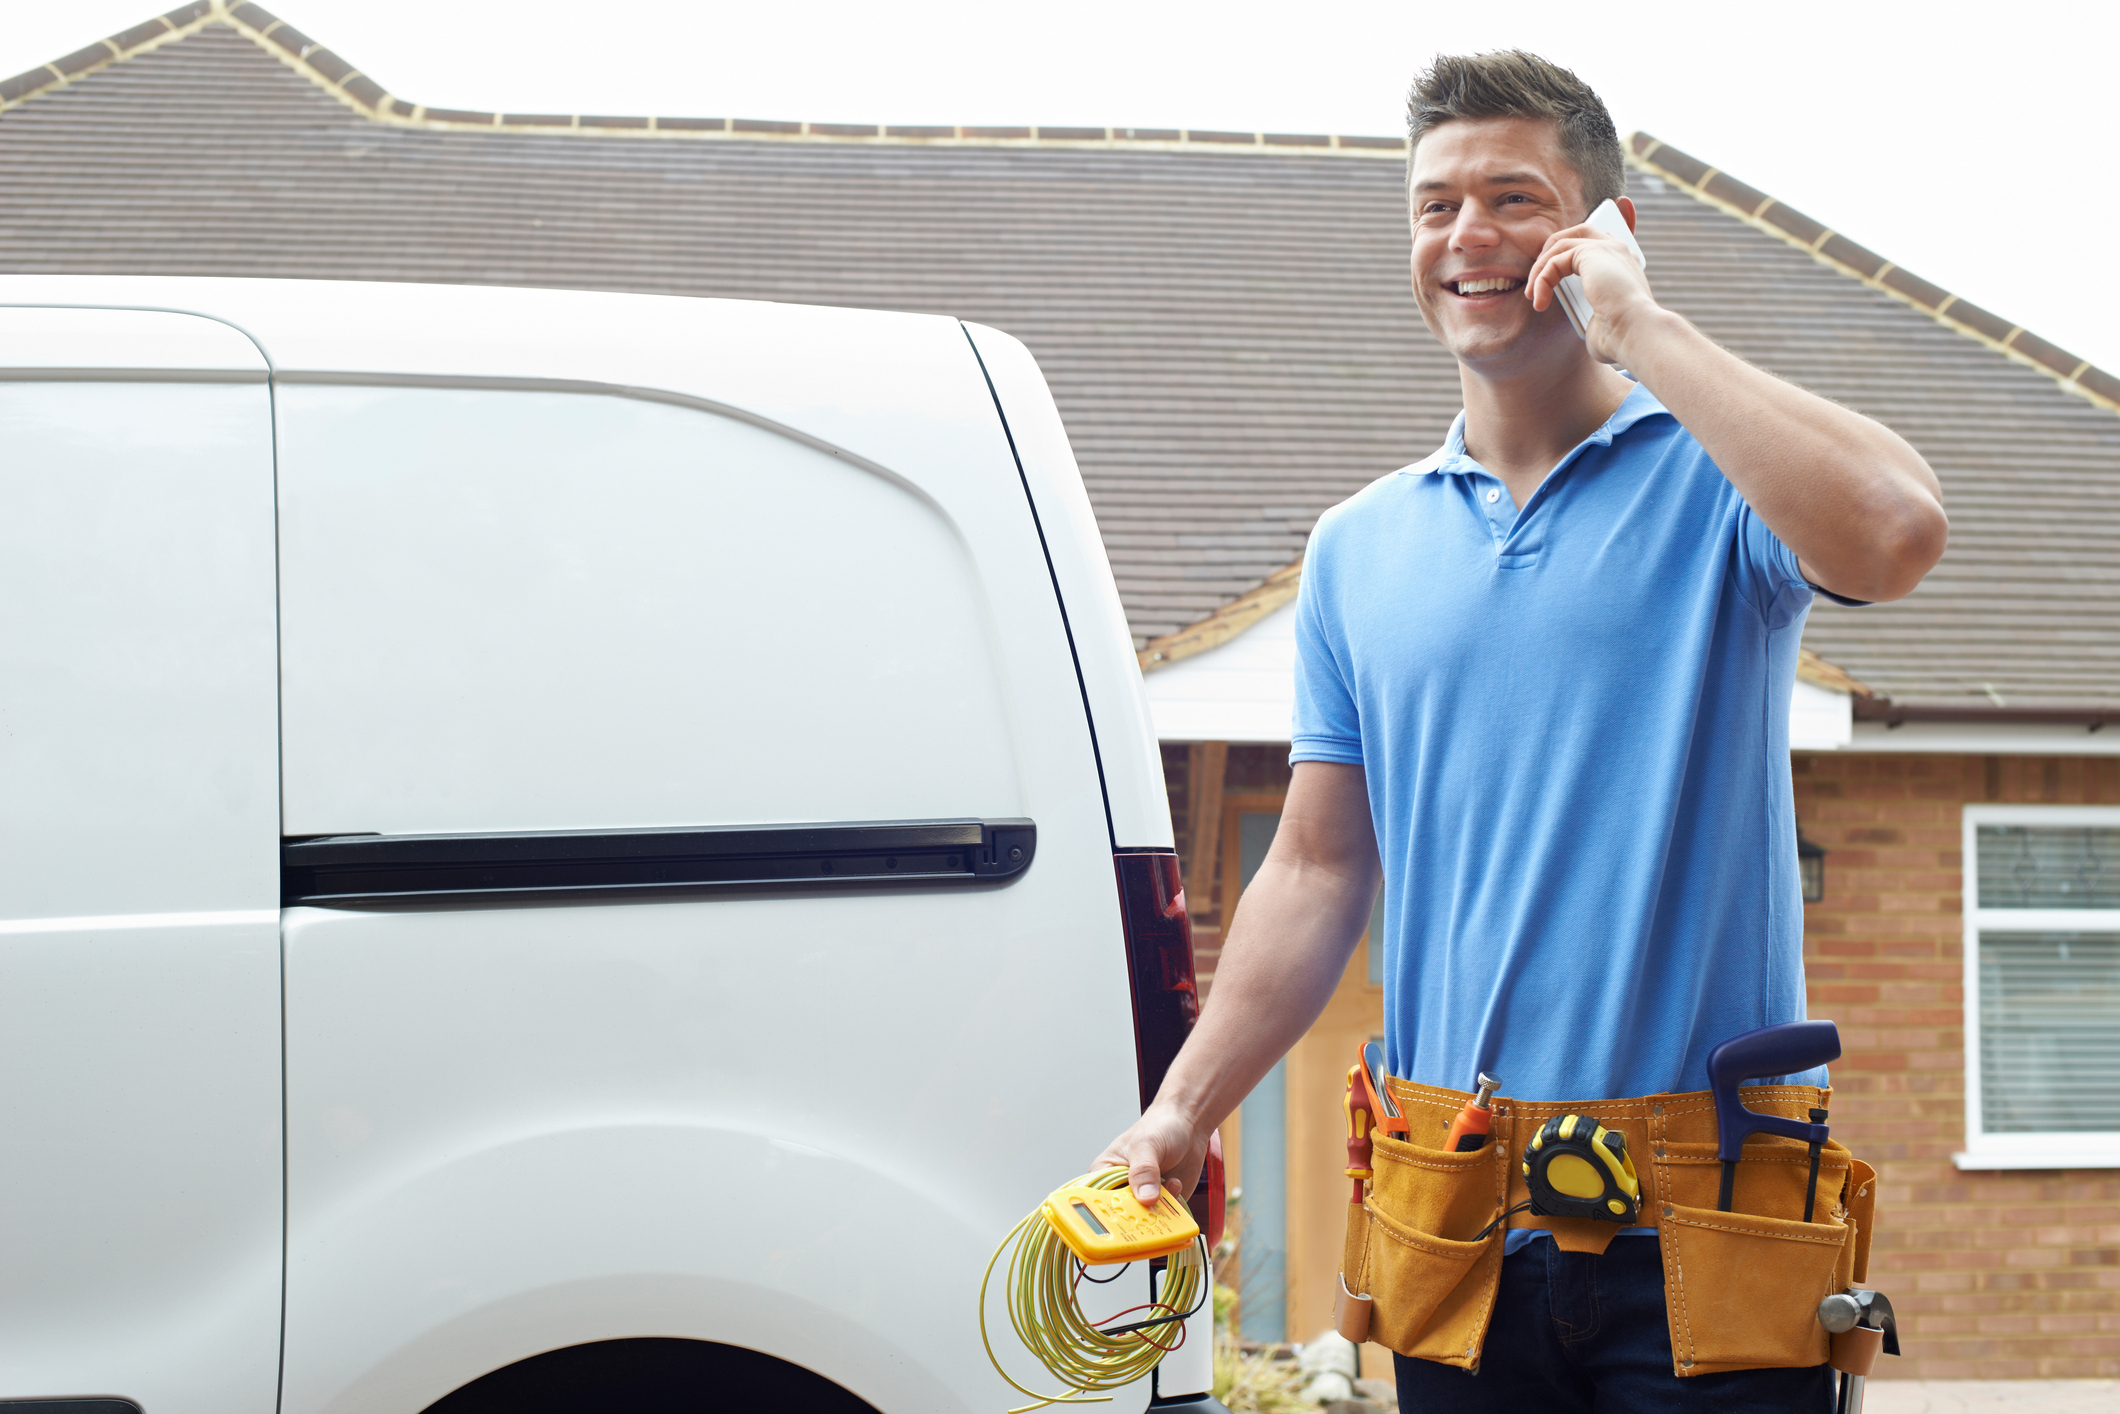 HVAC professional on the phone with toolbelt and work van